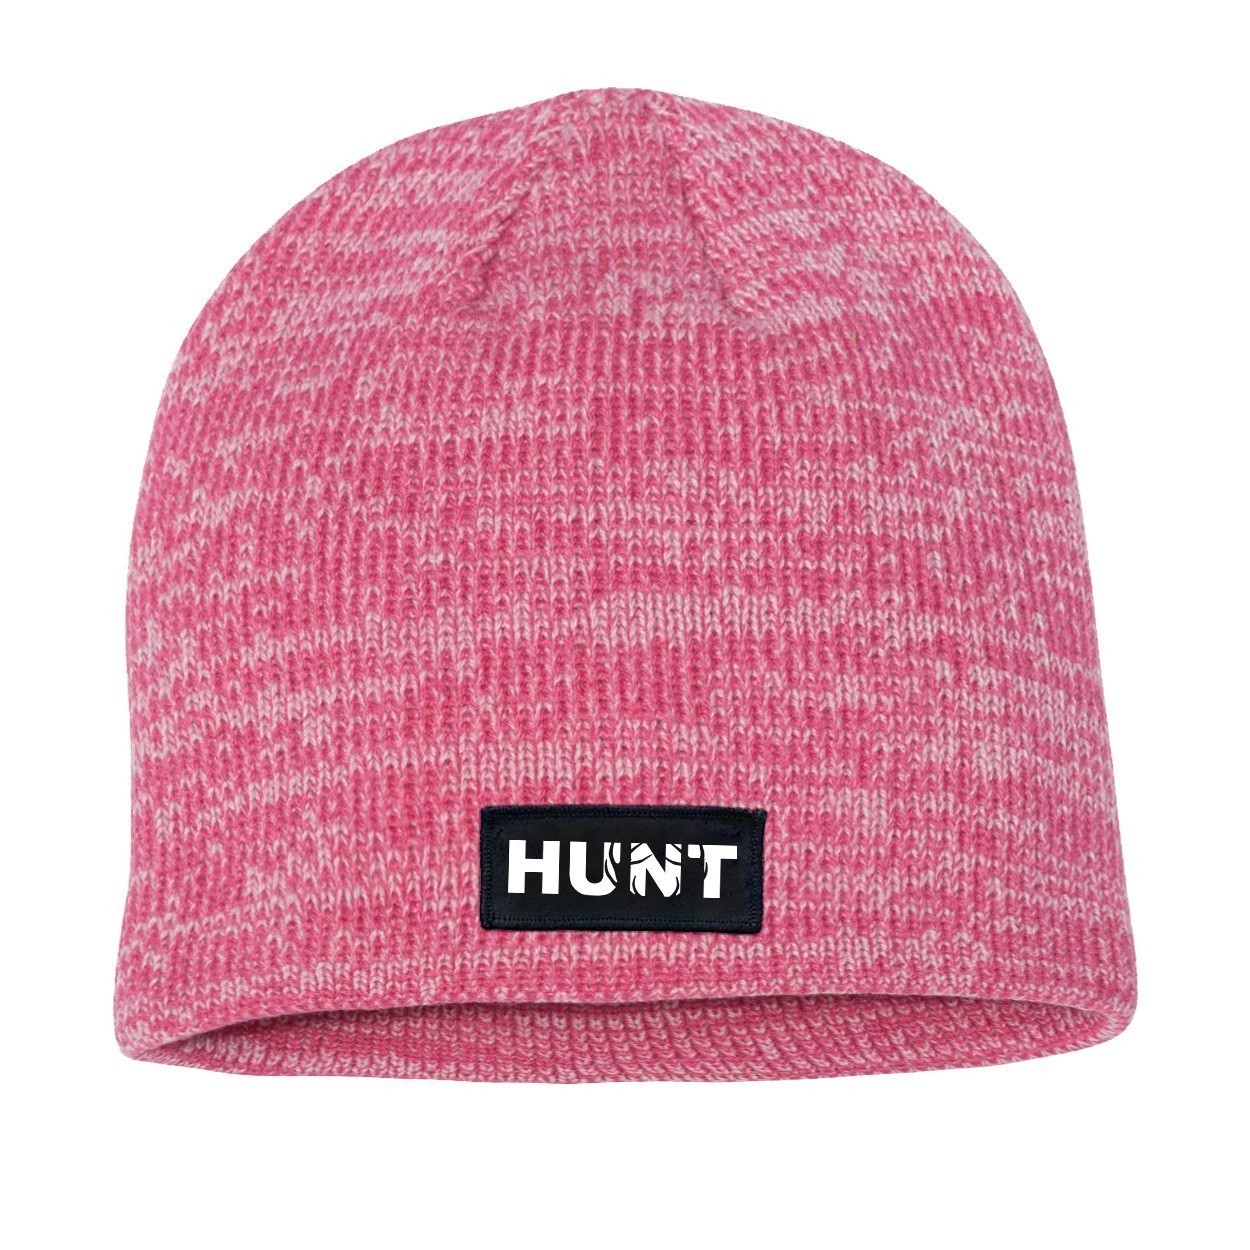 Hunt Rack Logo Night Out Woven Patch Skully Marled Knit Beanie Pink/Dark Pink (White Logo)